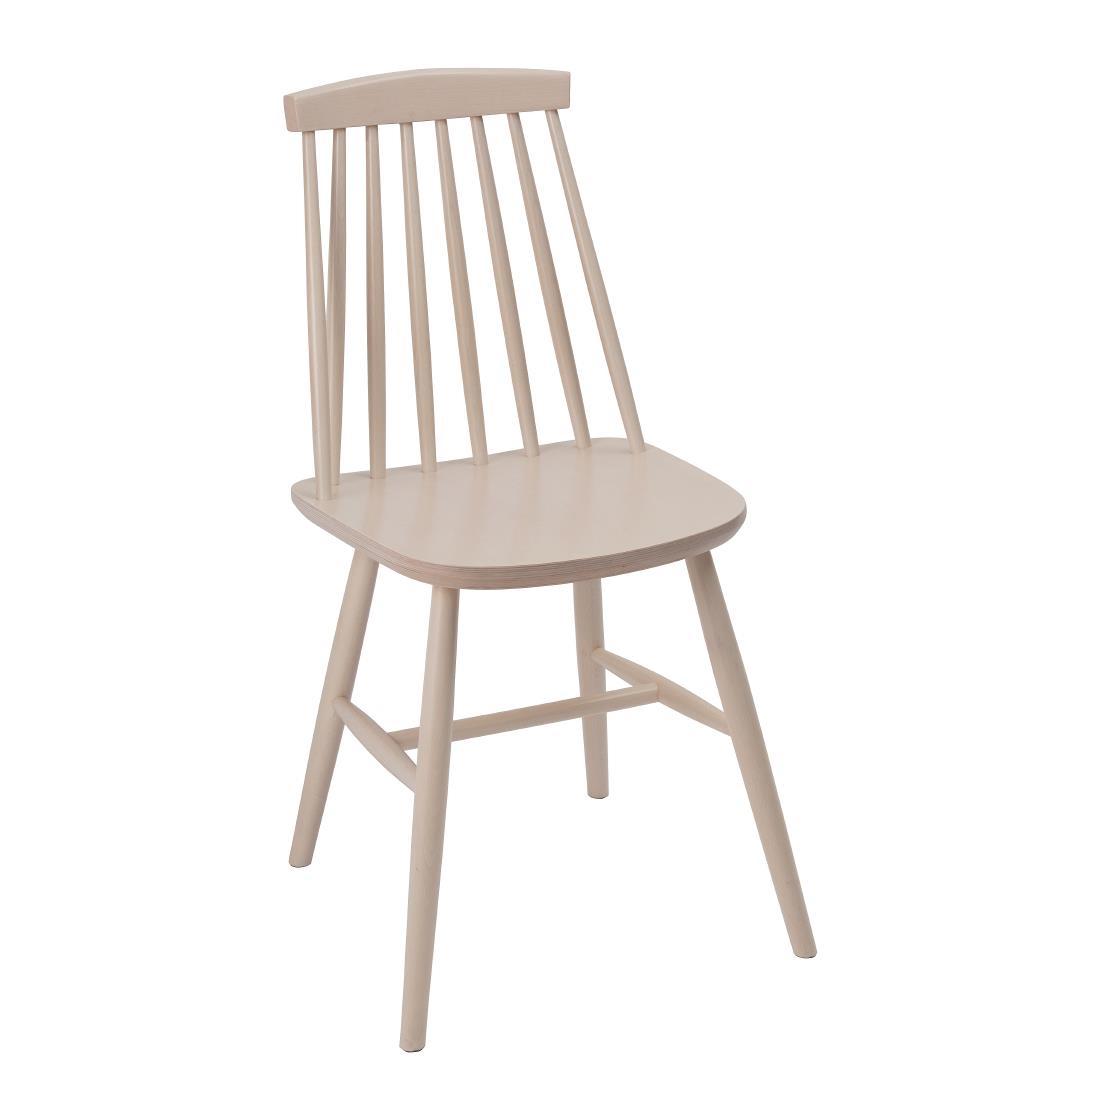 Fameg Farmhouse Angled Side Chairs White (Pack of 2) - DC354  - 6